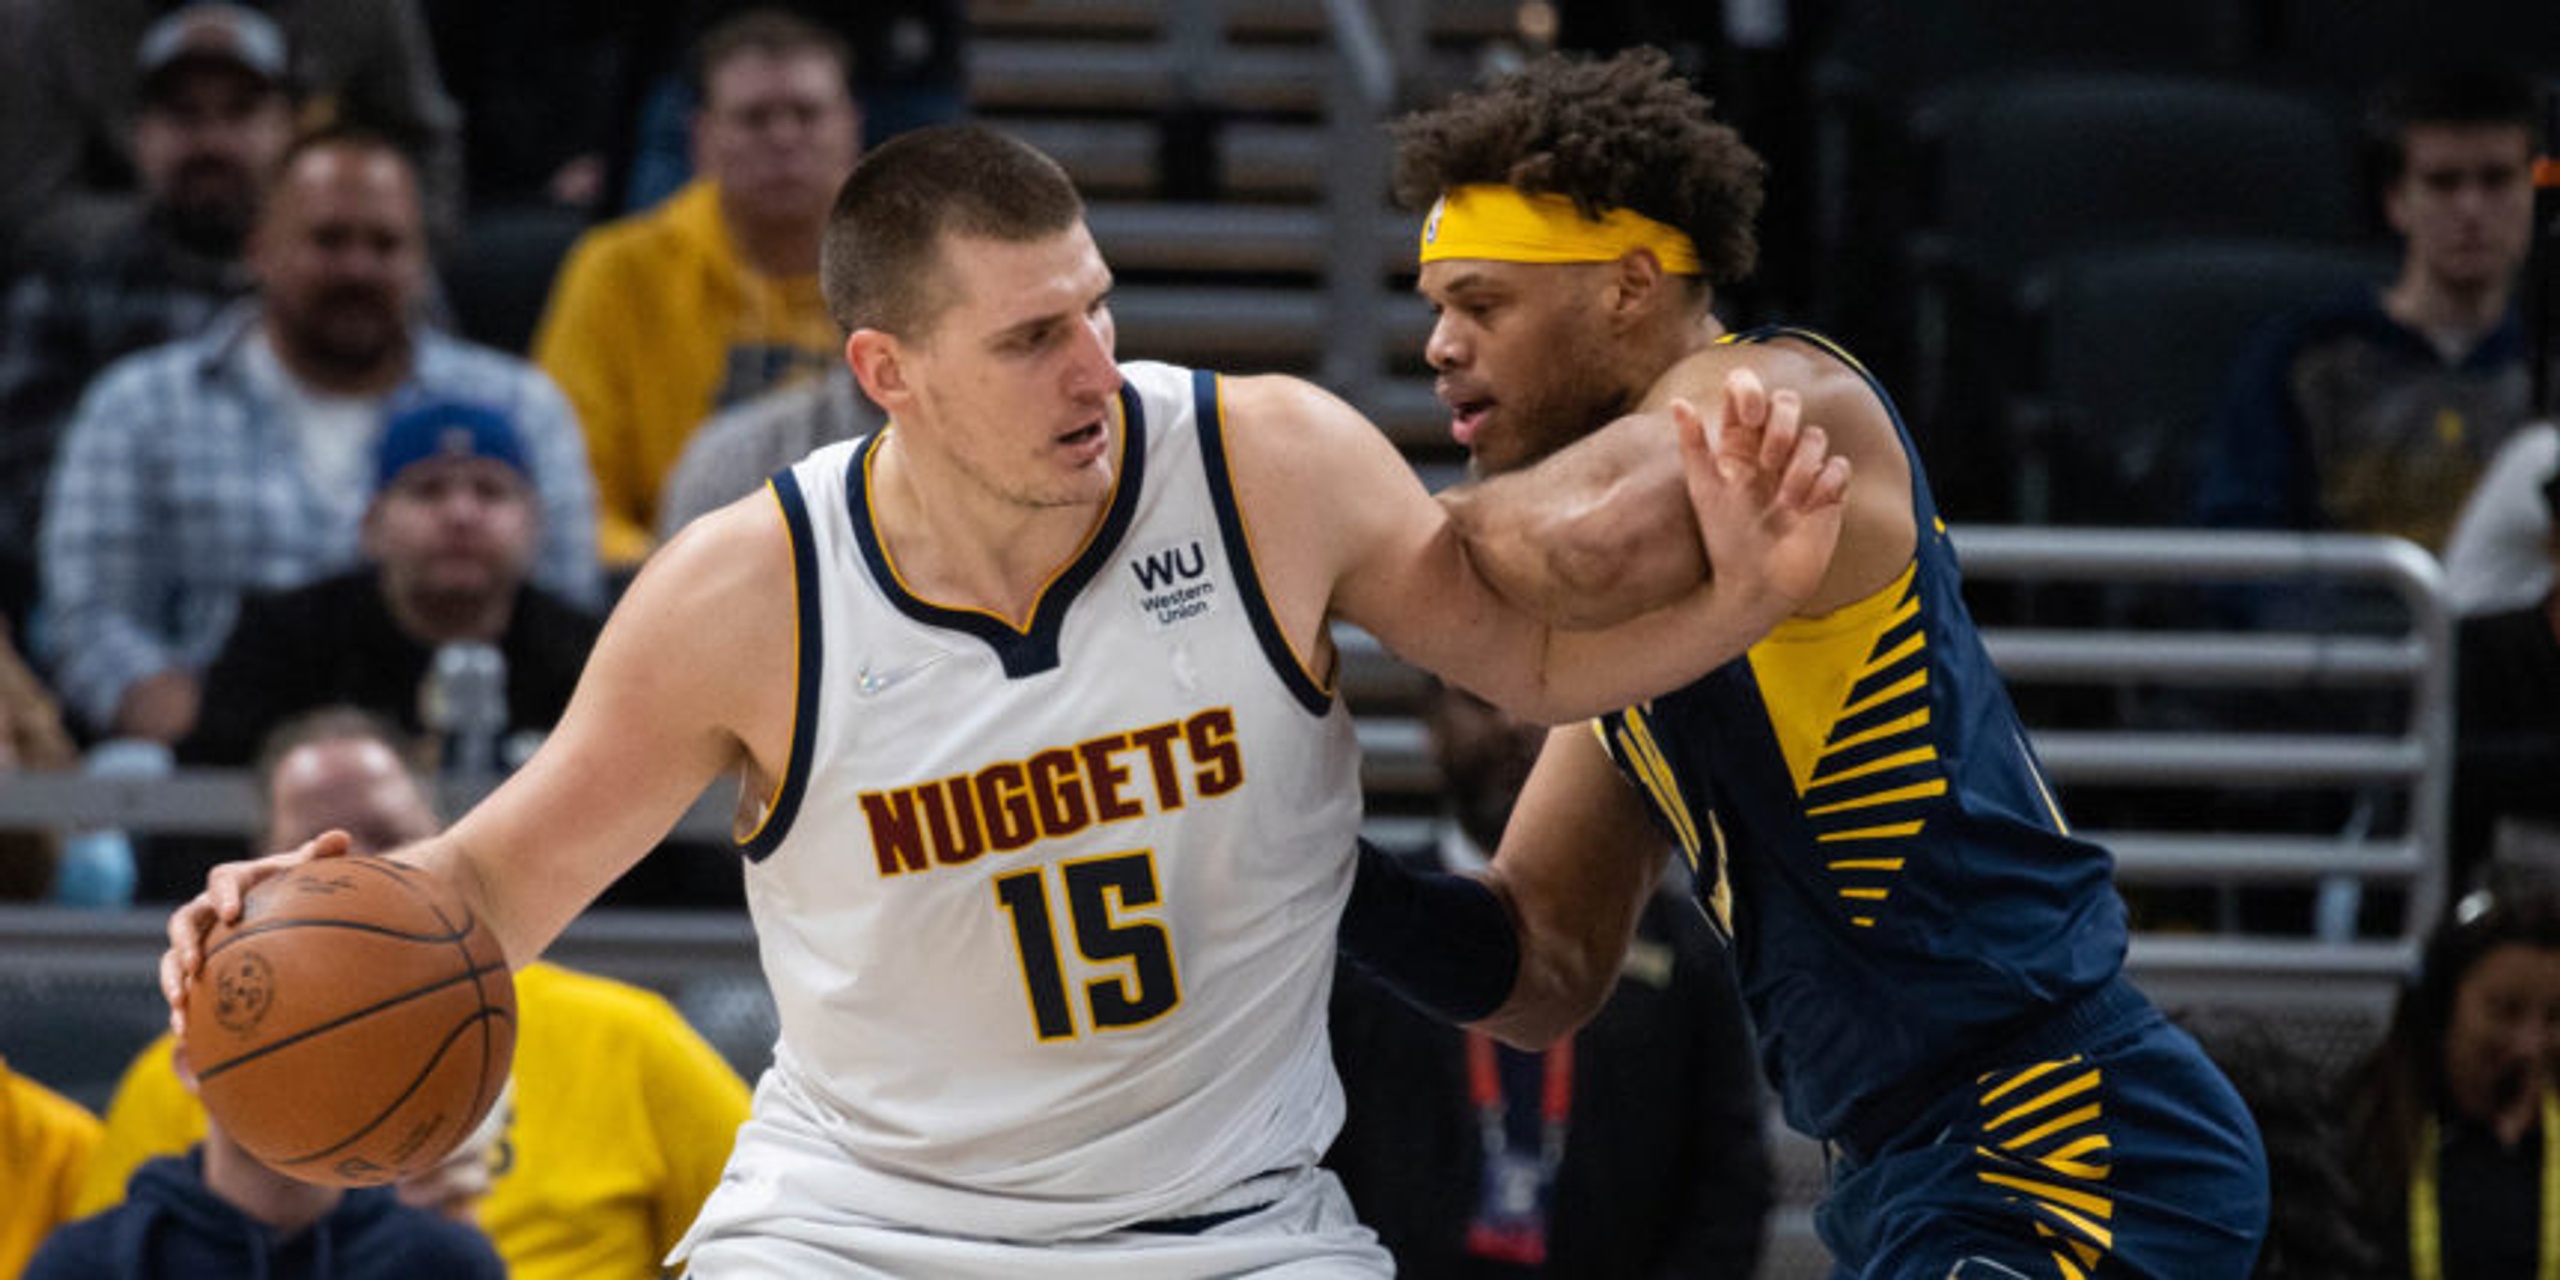 Jokic has 37 points to lead Nuggets past Pacers 125-118